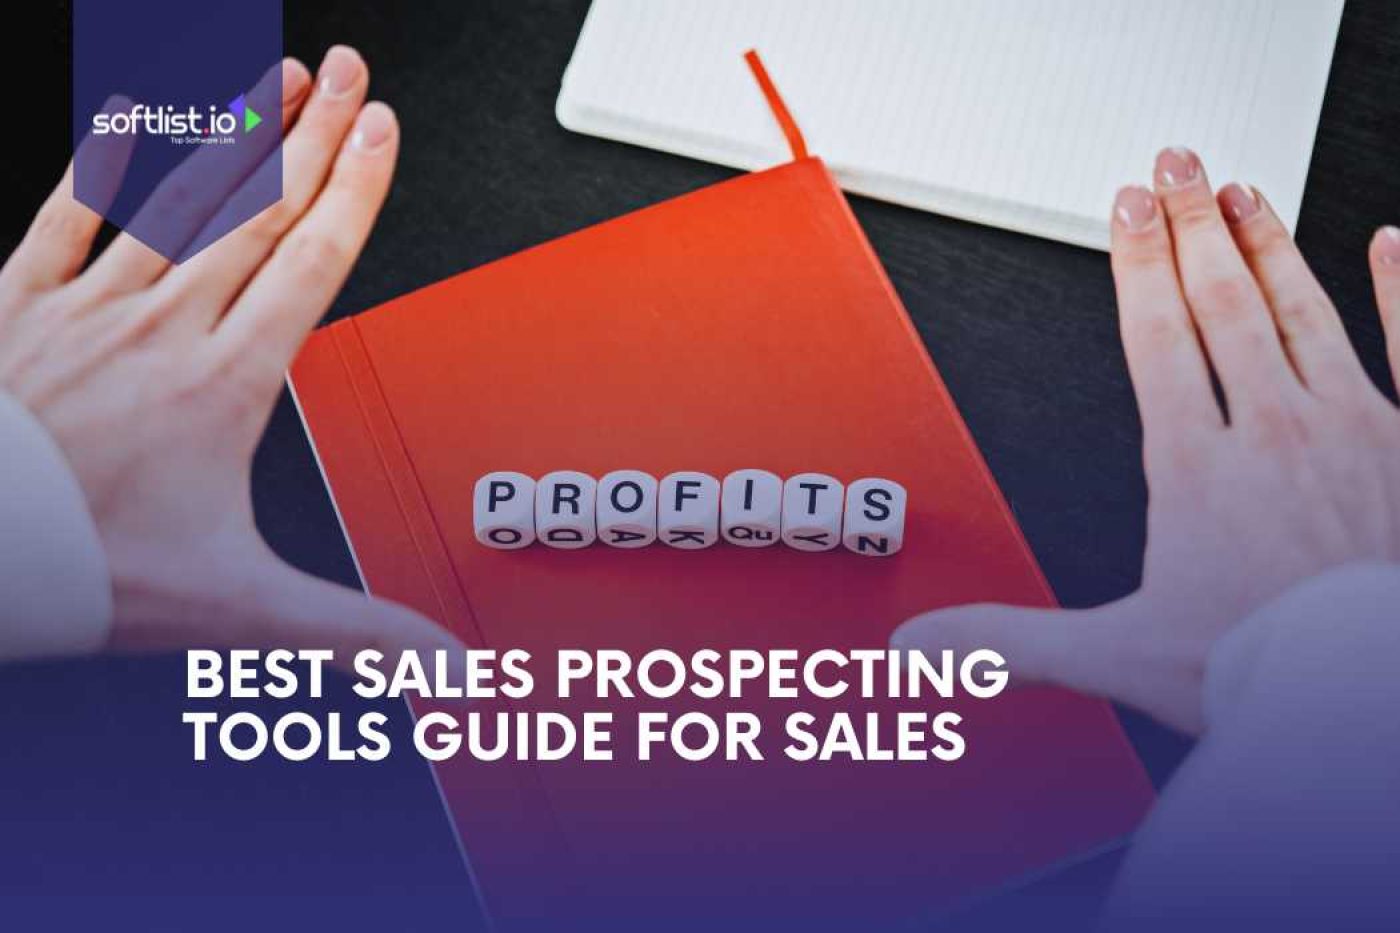 Best Sales Prospecting Tools Guide for Sales